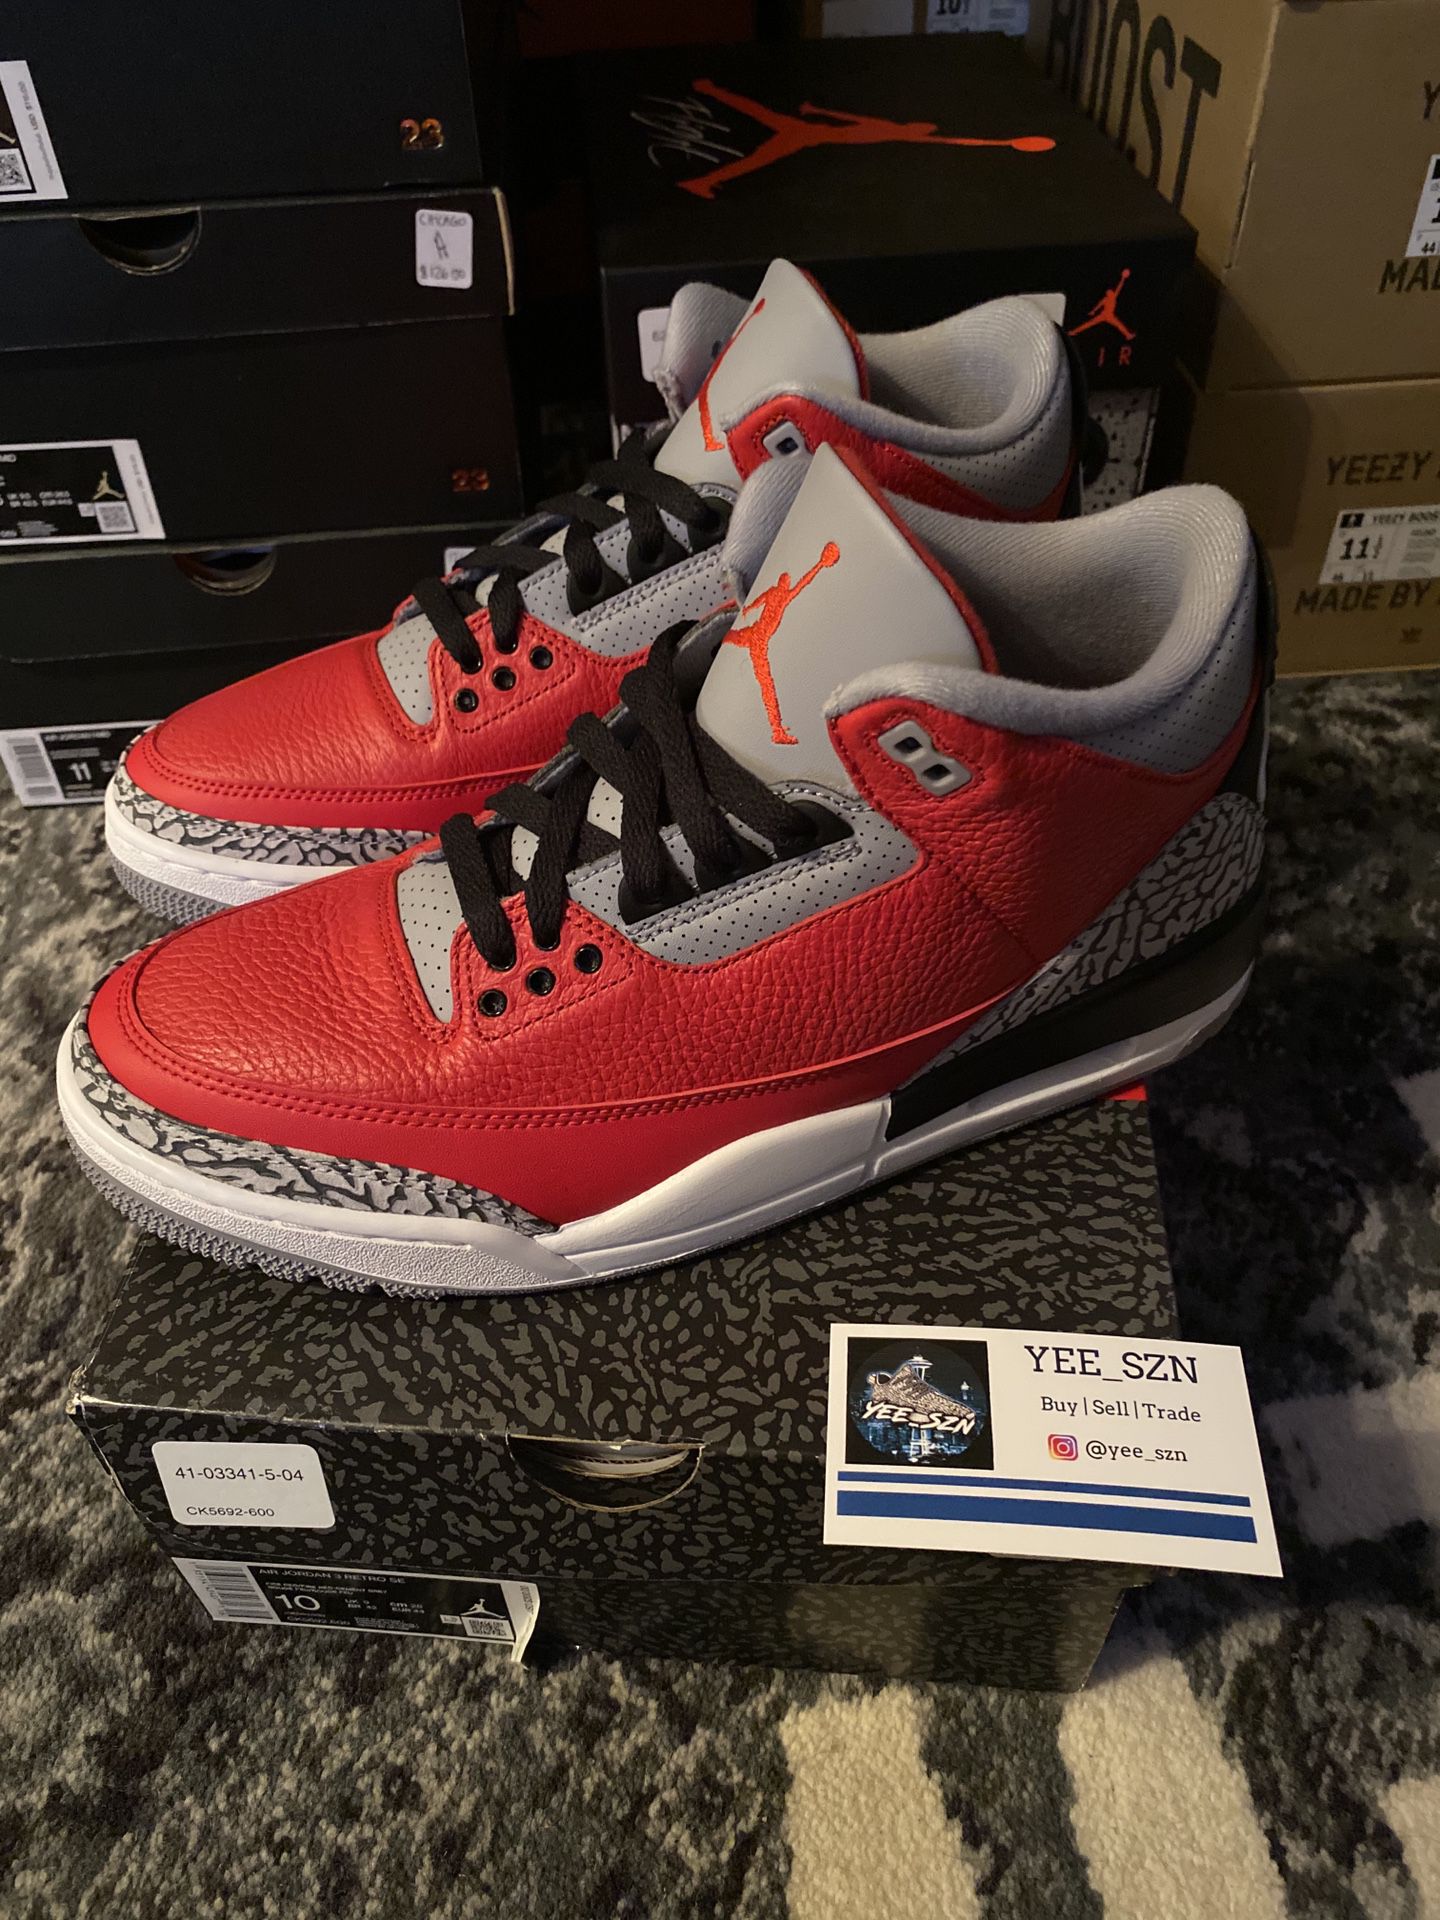 Nike air Jordan 3 fire red size 10 ds $240